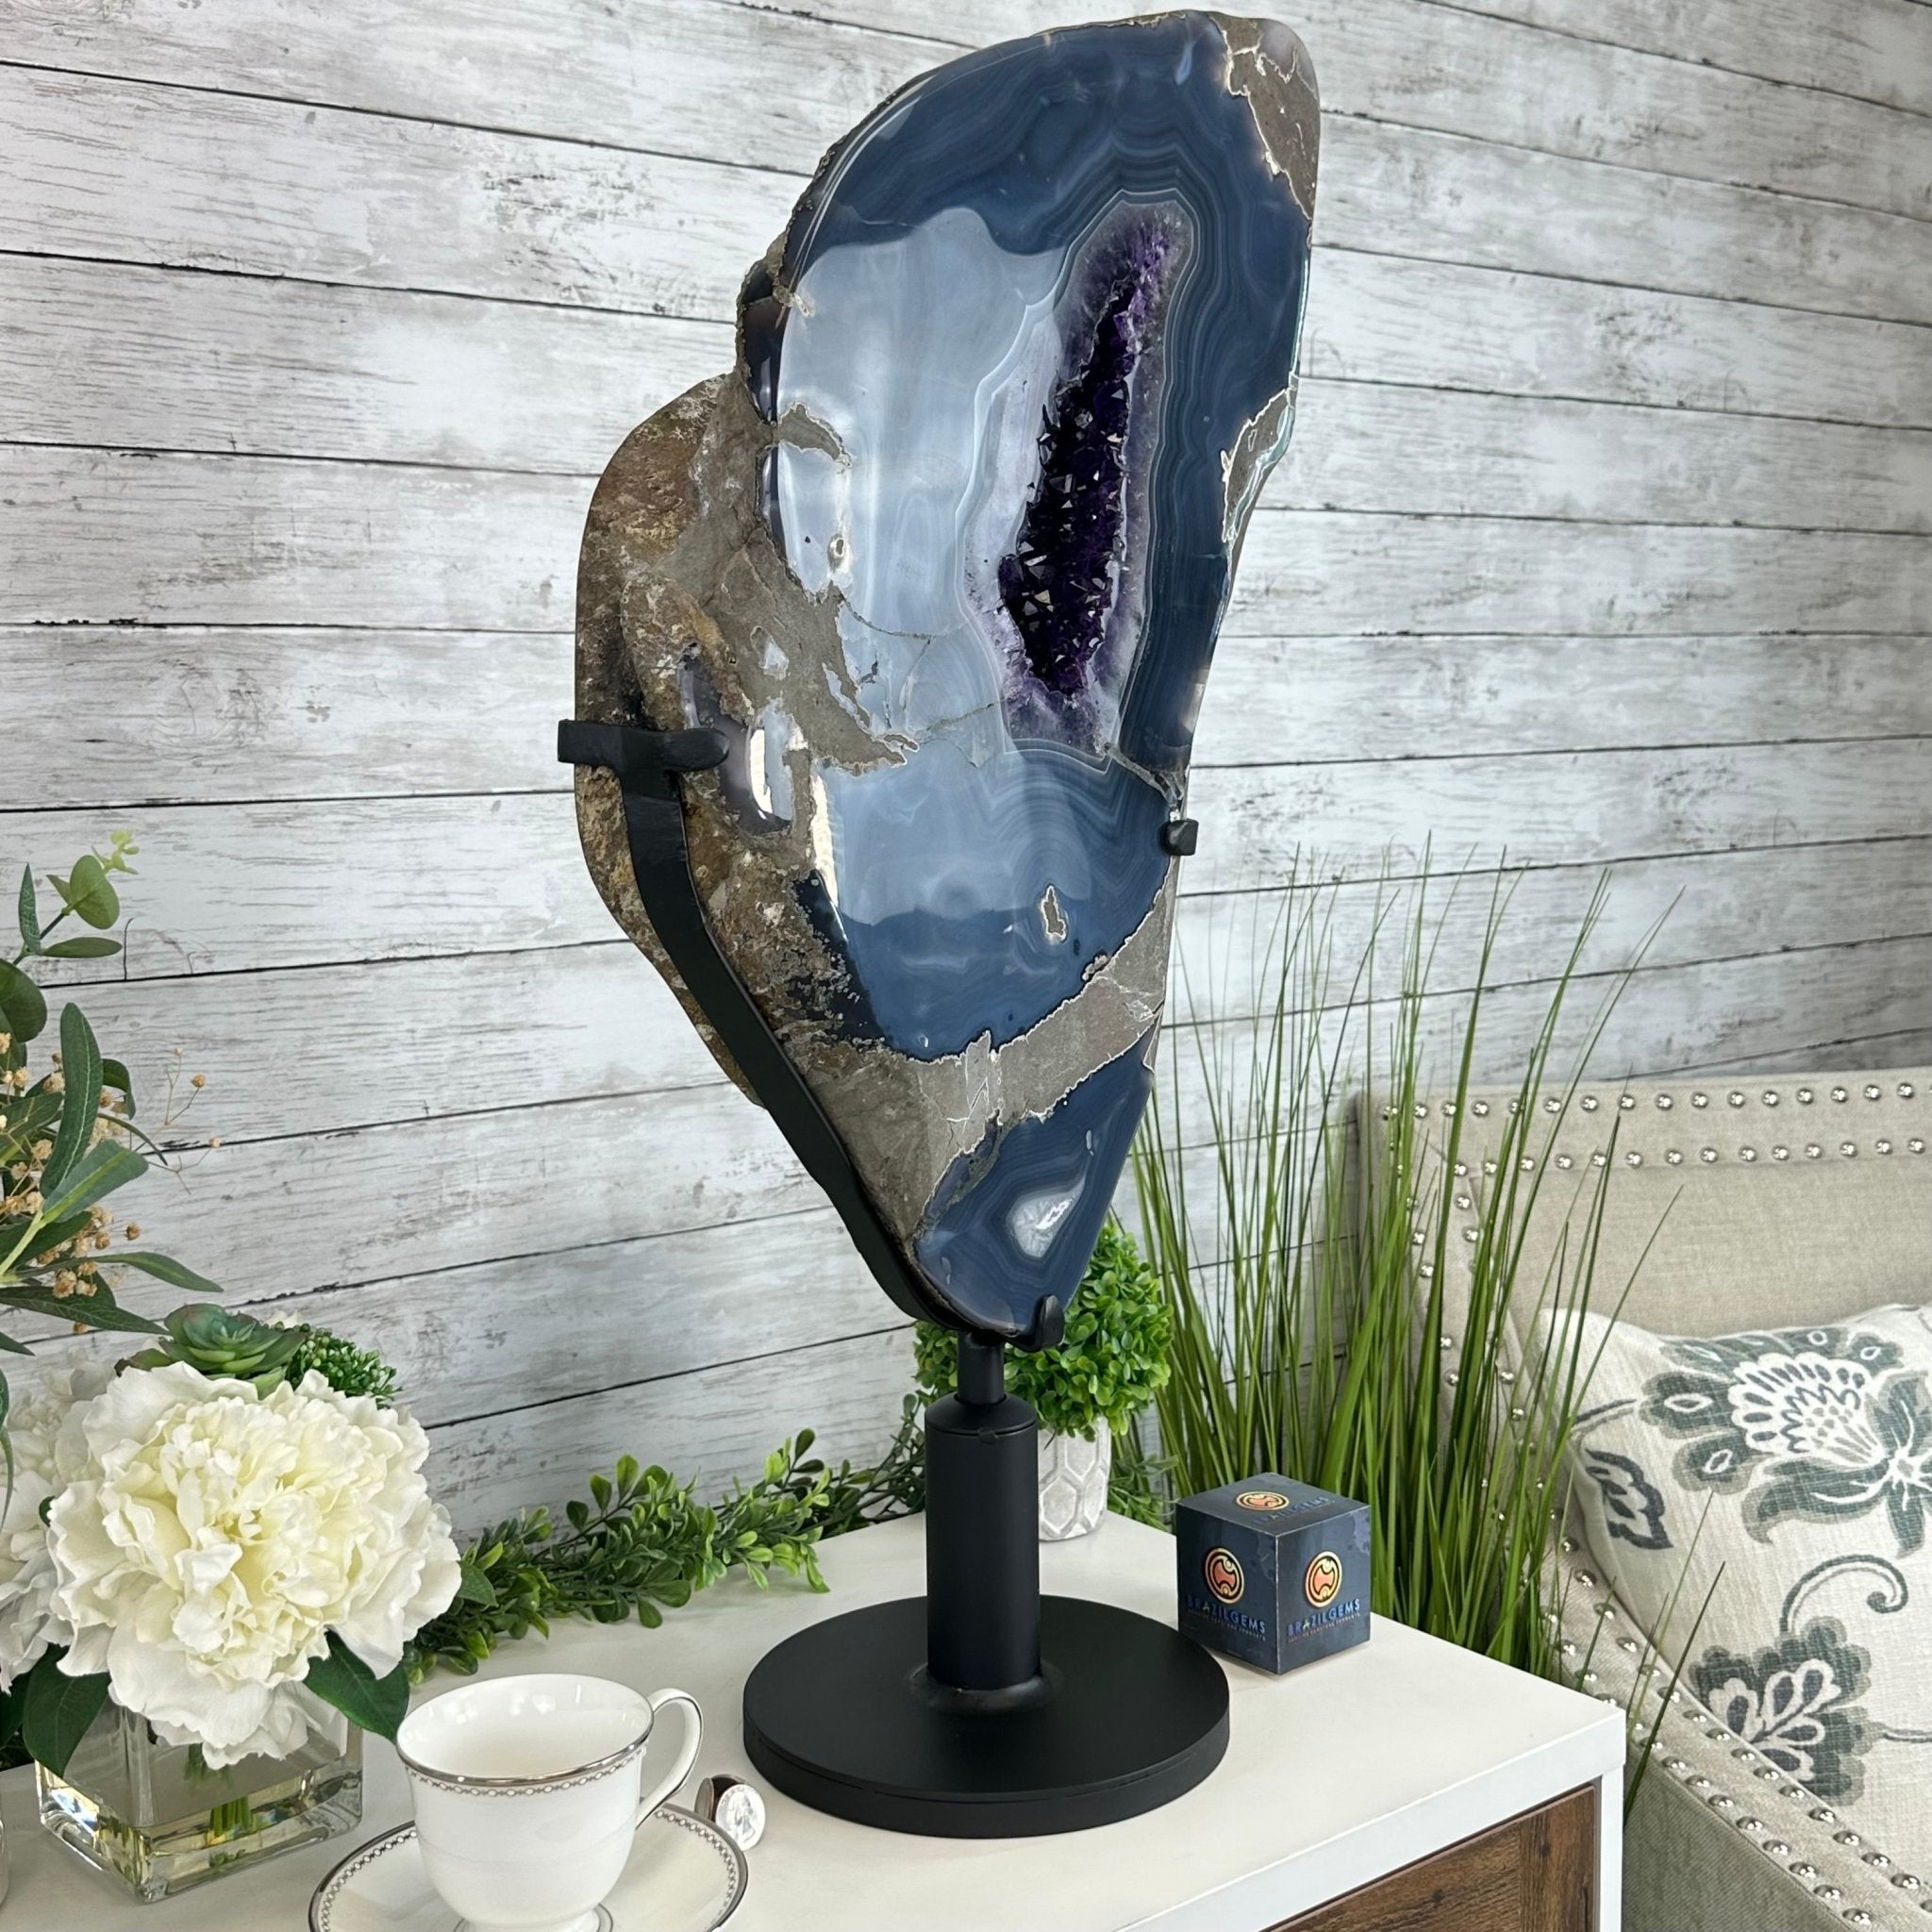 Super Quality Amethyst Portal, Rotating Stand, 47.7 lbs & 28.6" Tall #5604 - 0135 - Brazil GemsBrazil GemsSuper Quality Amethyst Portal, Rotating Stand, 47.7 lbs & 28.6" Tall #5604 - 0135Portals on Rotating Bases5604 - 0135